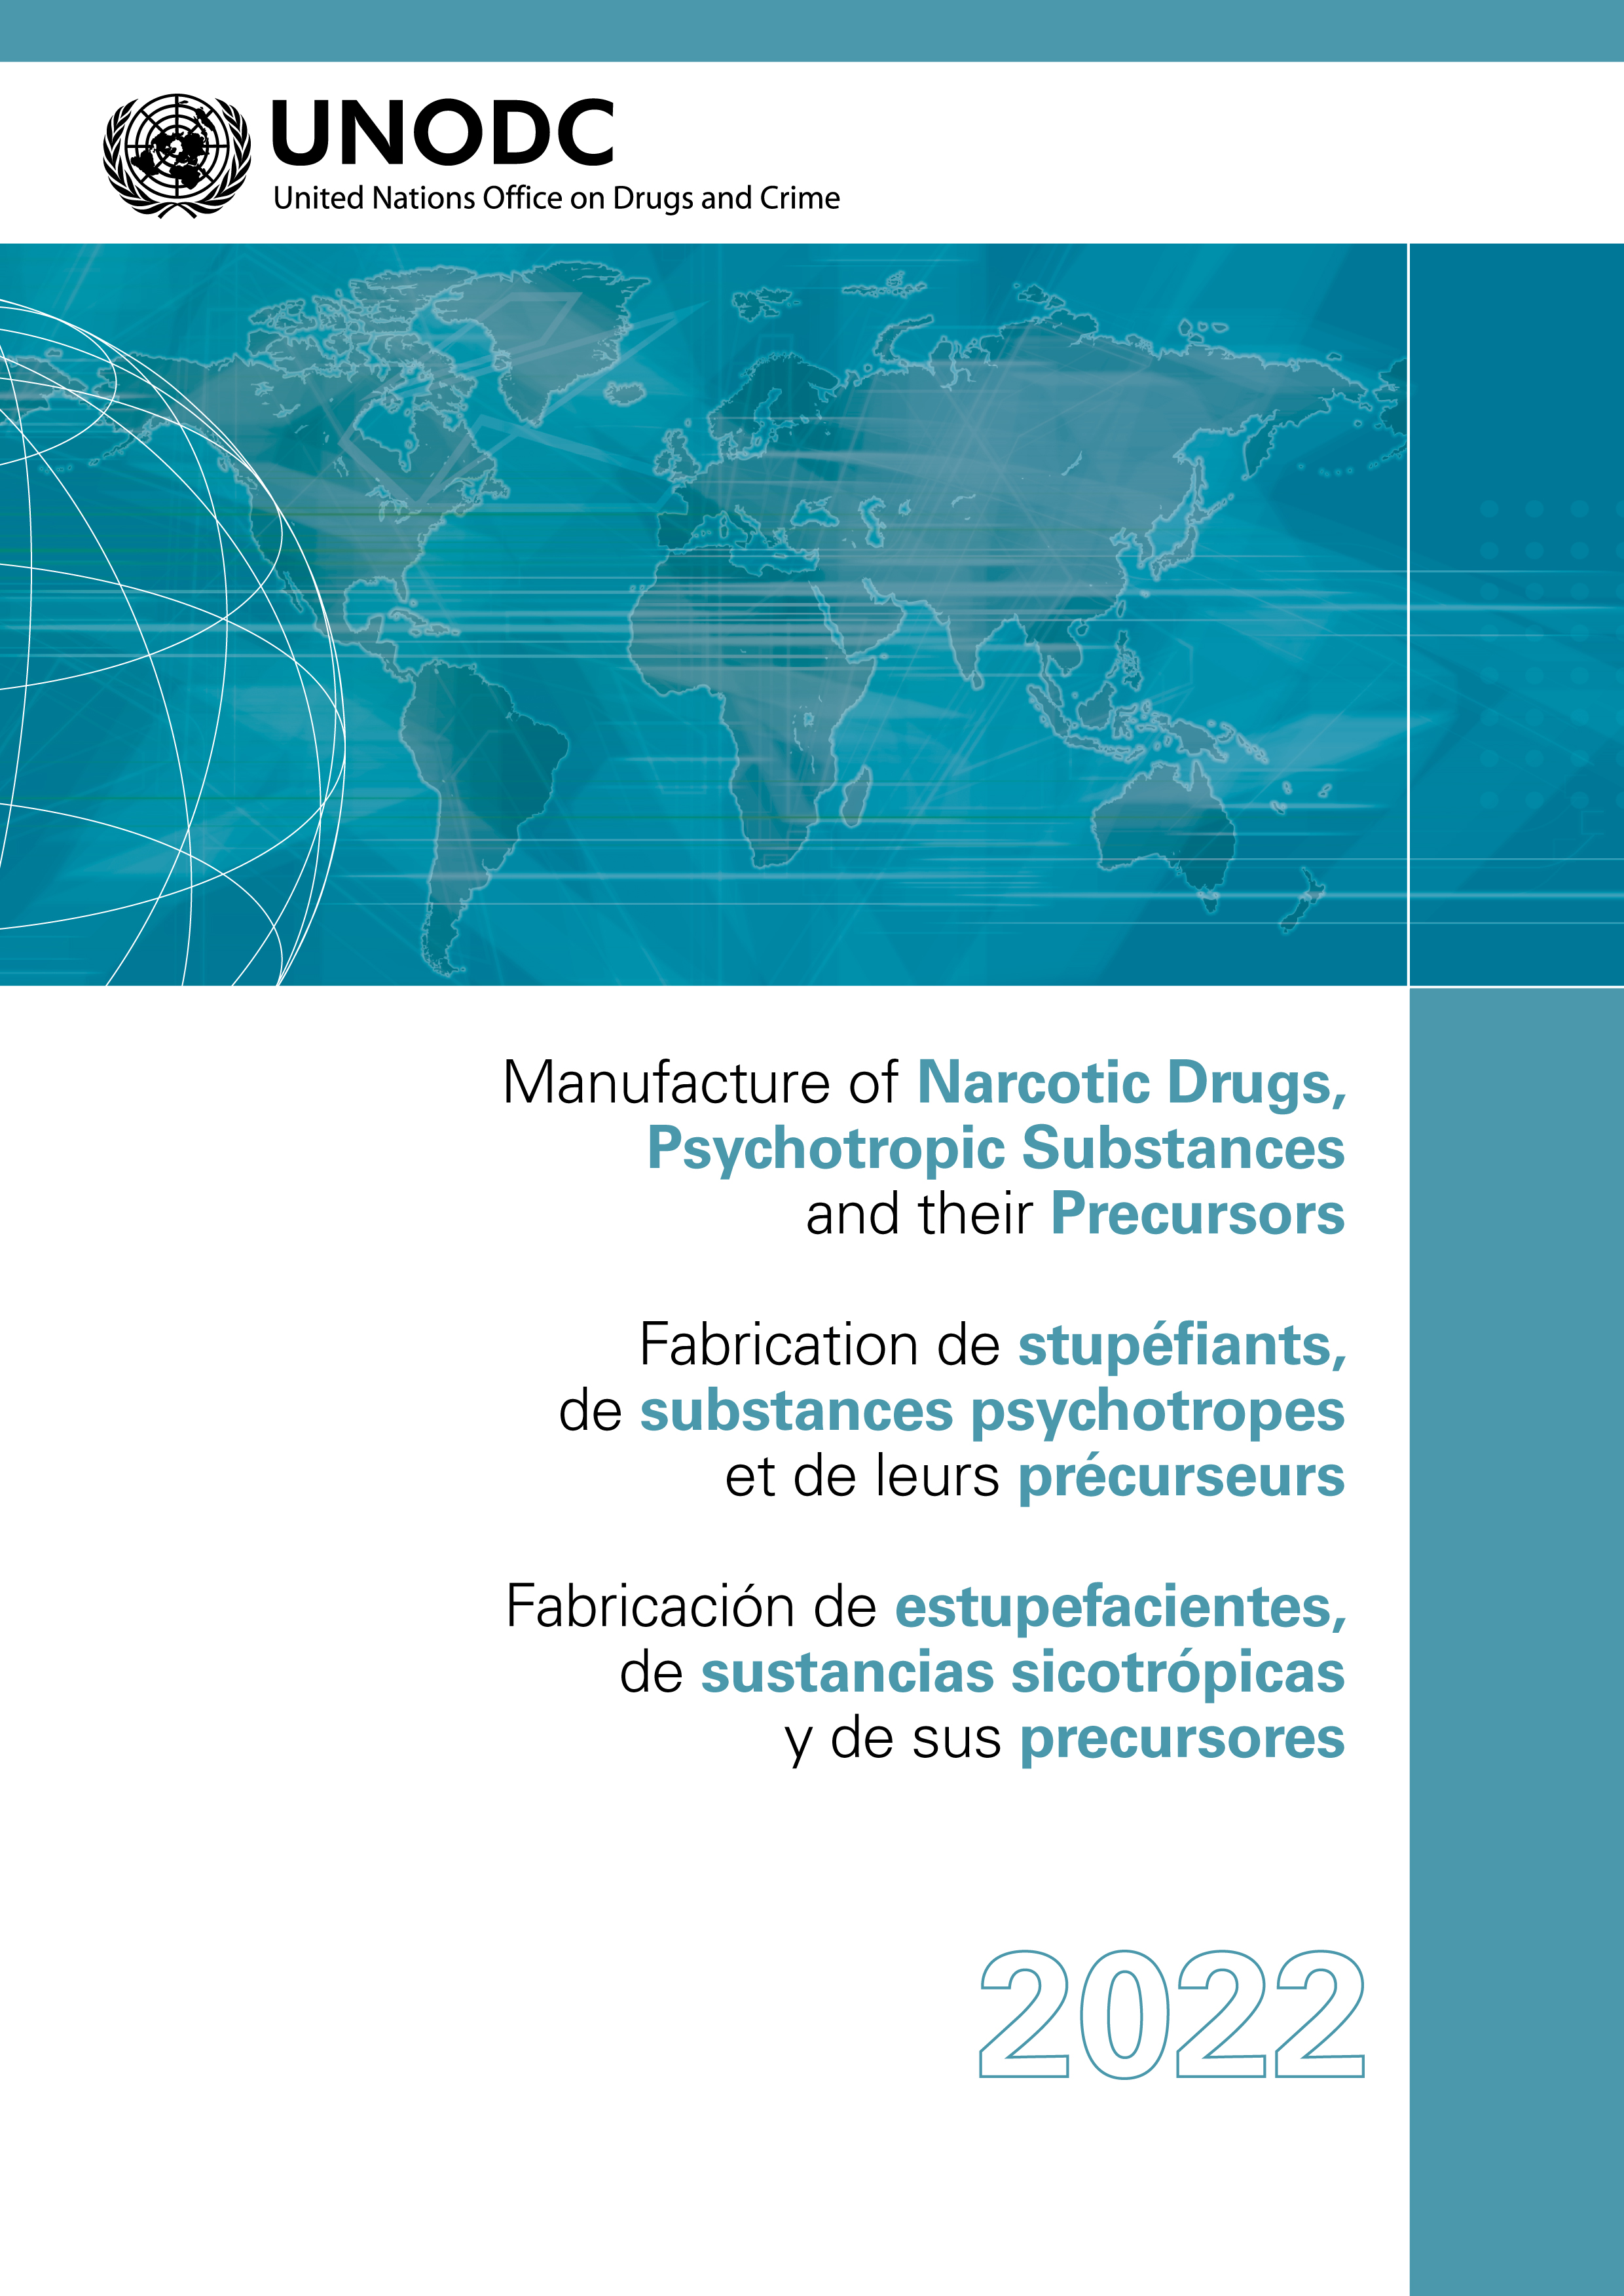 image of Manufacture of Narcotic Drugs, Psychotropic Substances and their Precursors 2022